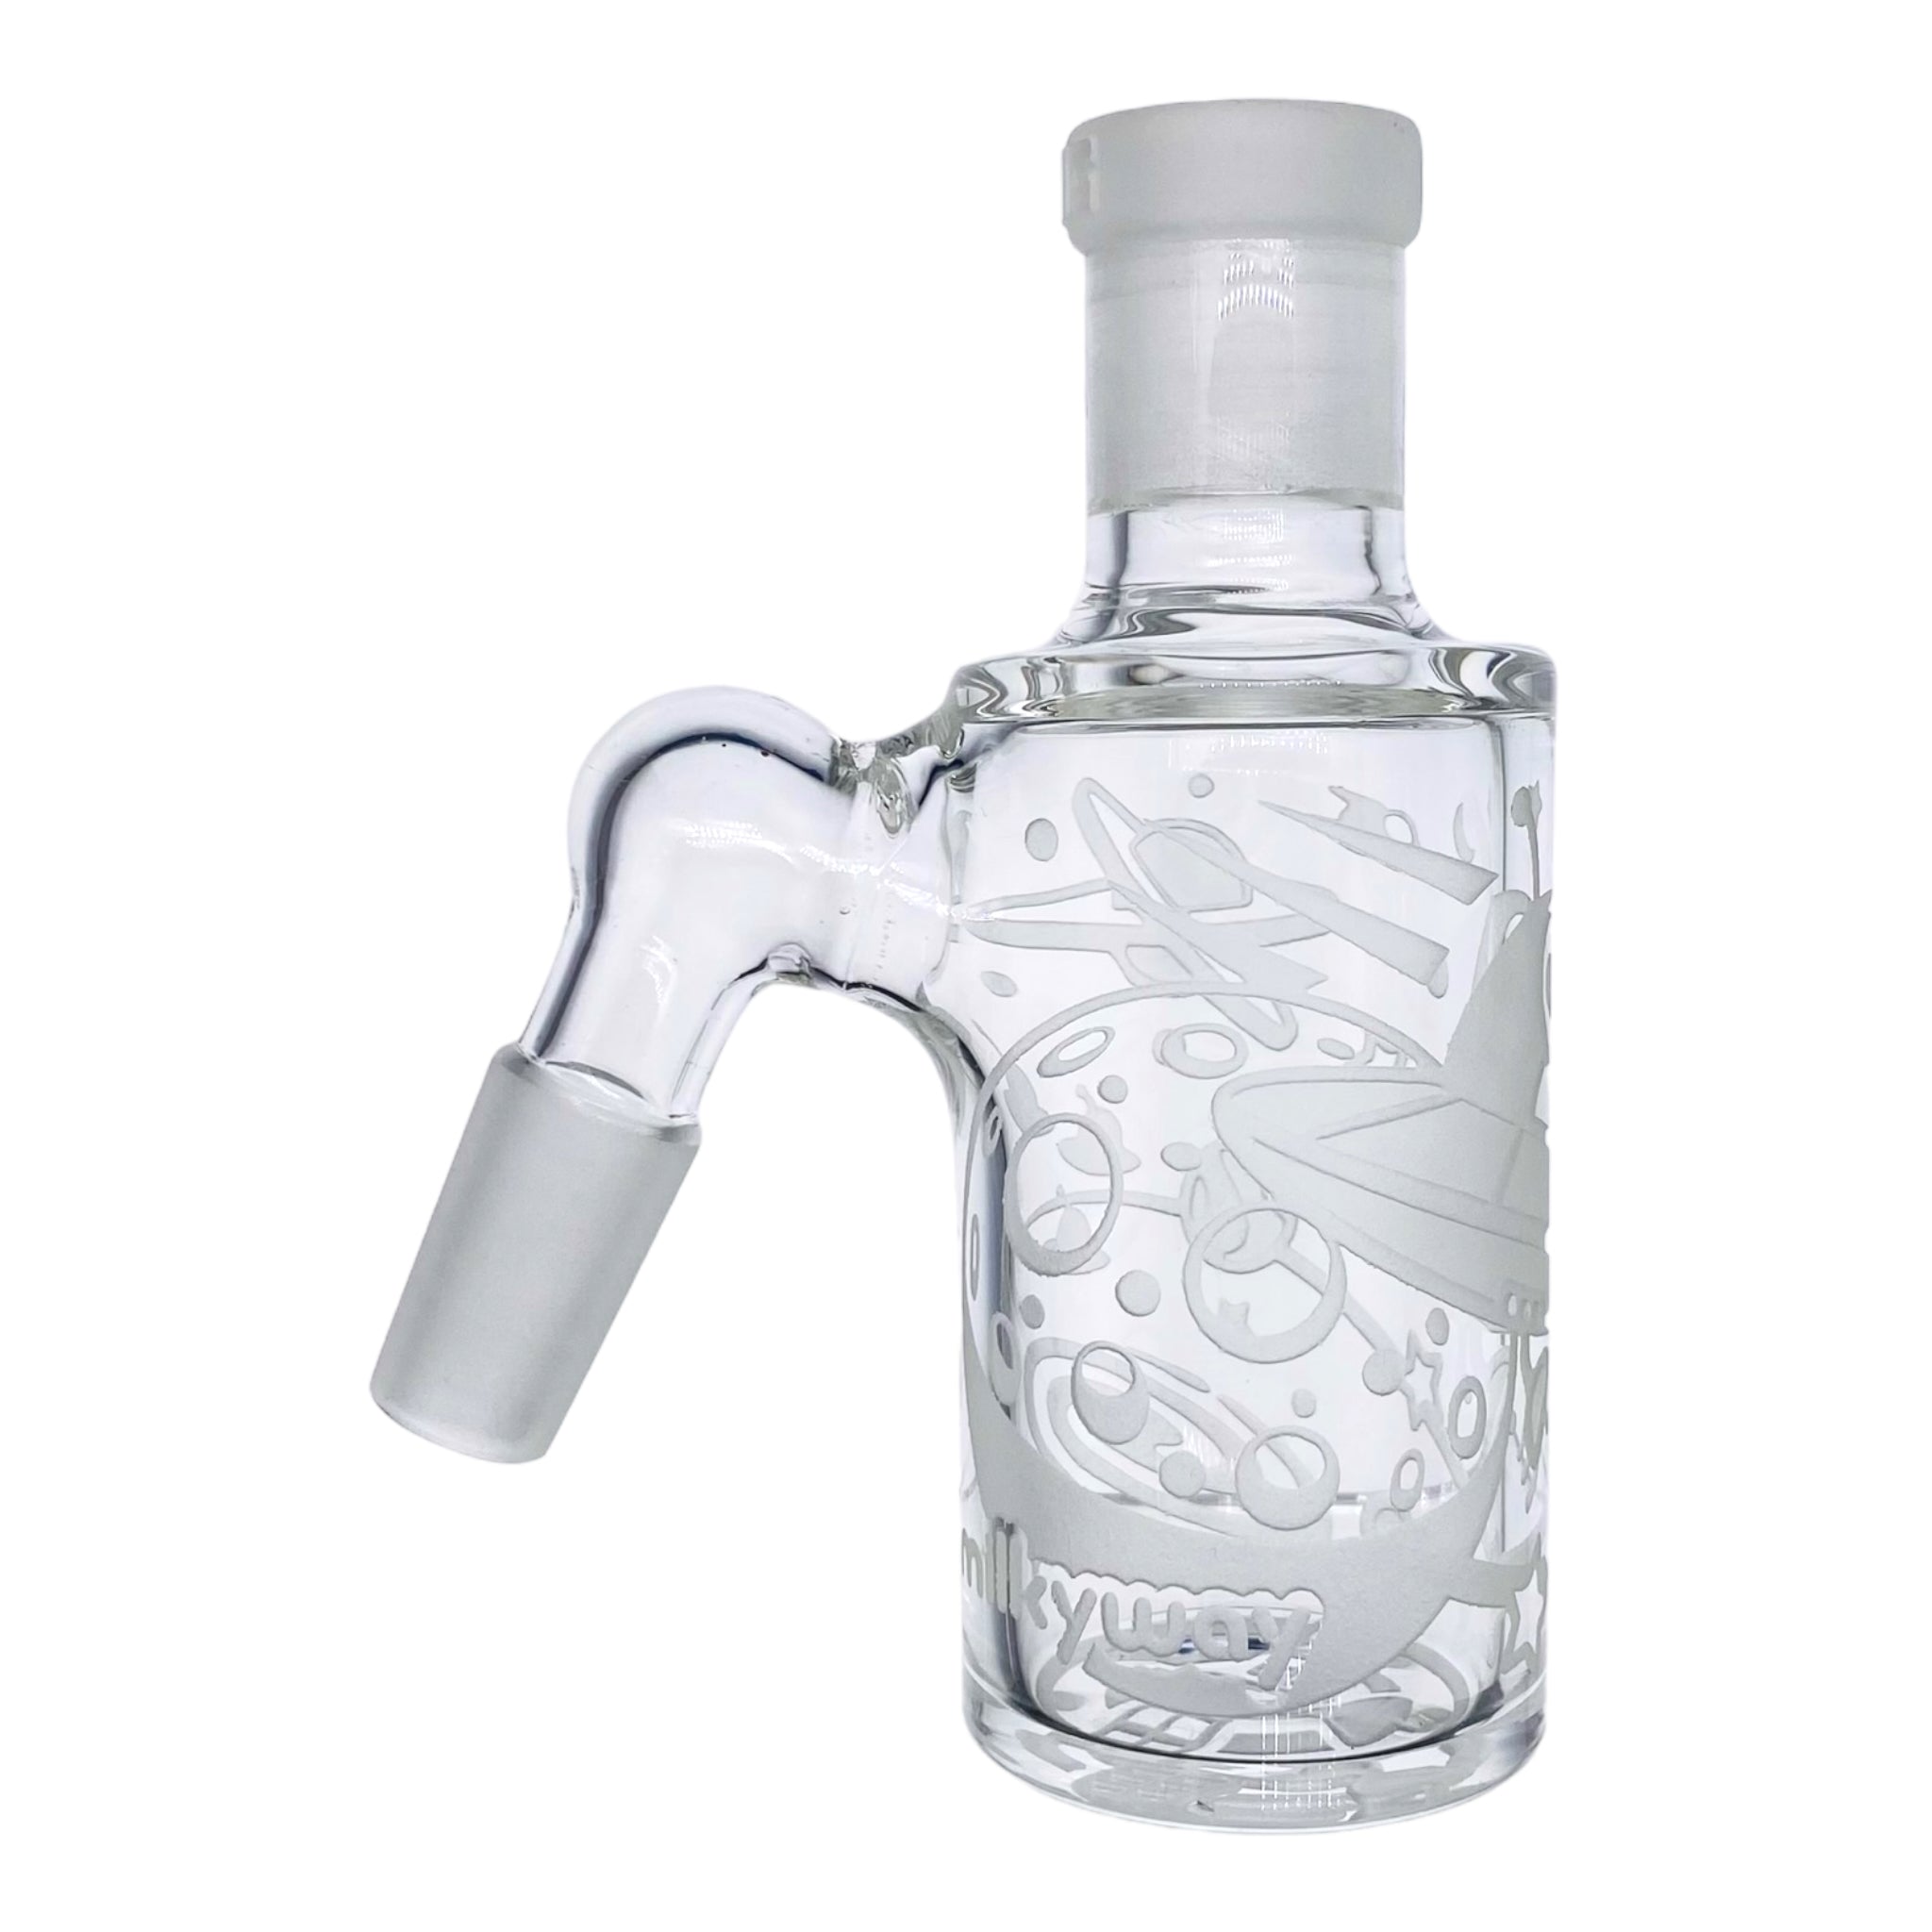 Milkyway Glass - Space Odyssey Dry Ashcatcher for bongs - 45 Degree Male Clear